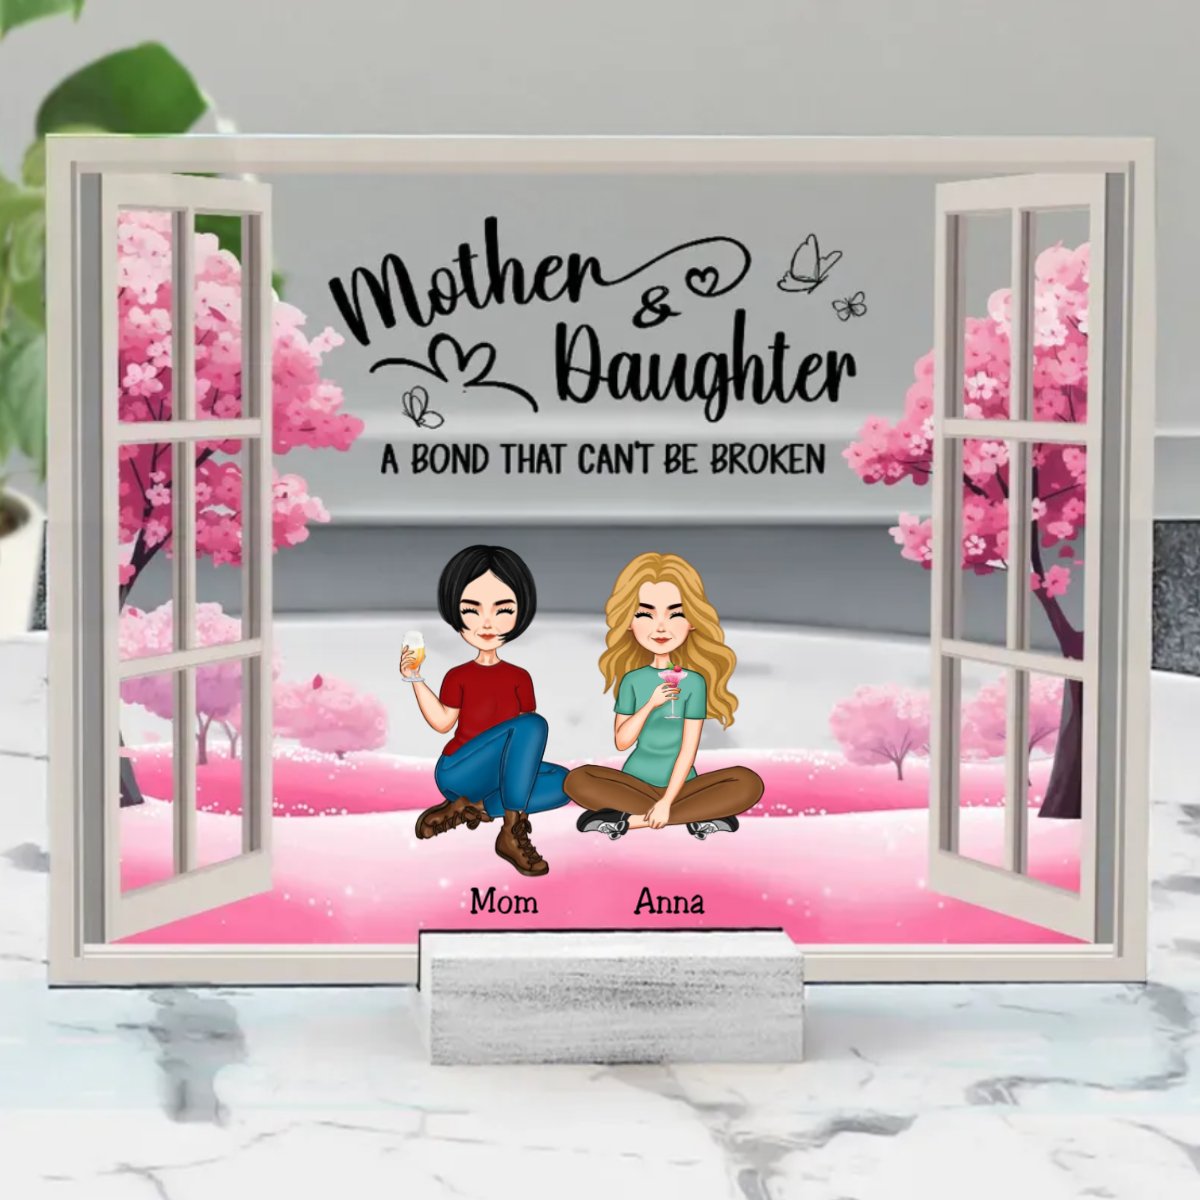 Family - Mom And Daughters A Bond That Can't Be Broken - Personalized Acrylic Plaque - The Next Custom Gift